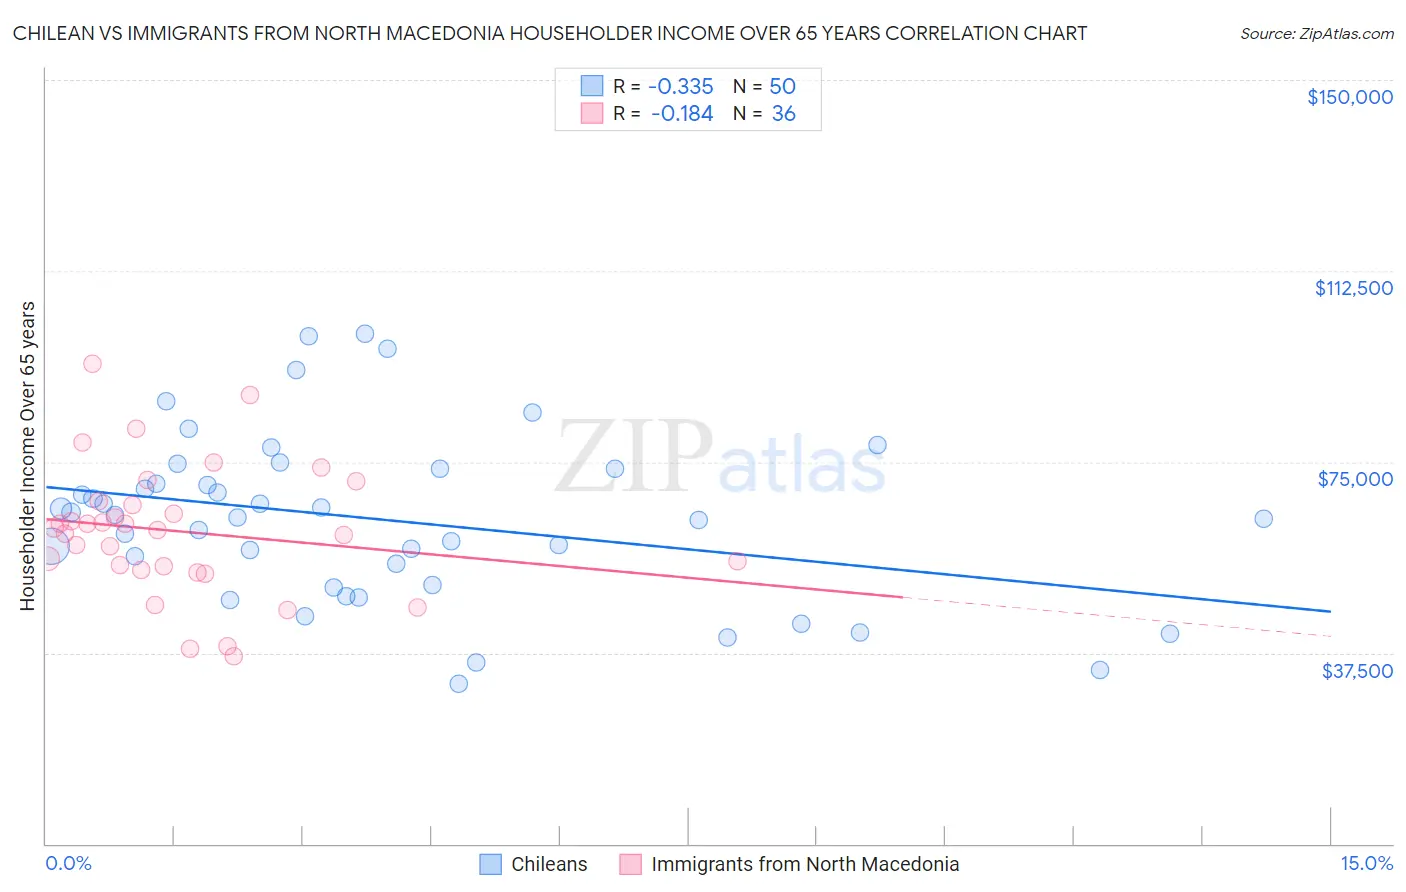 Chilean vs Immigrants from North Macedonia Householder Income Over 65 years